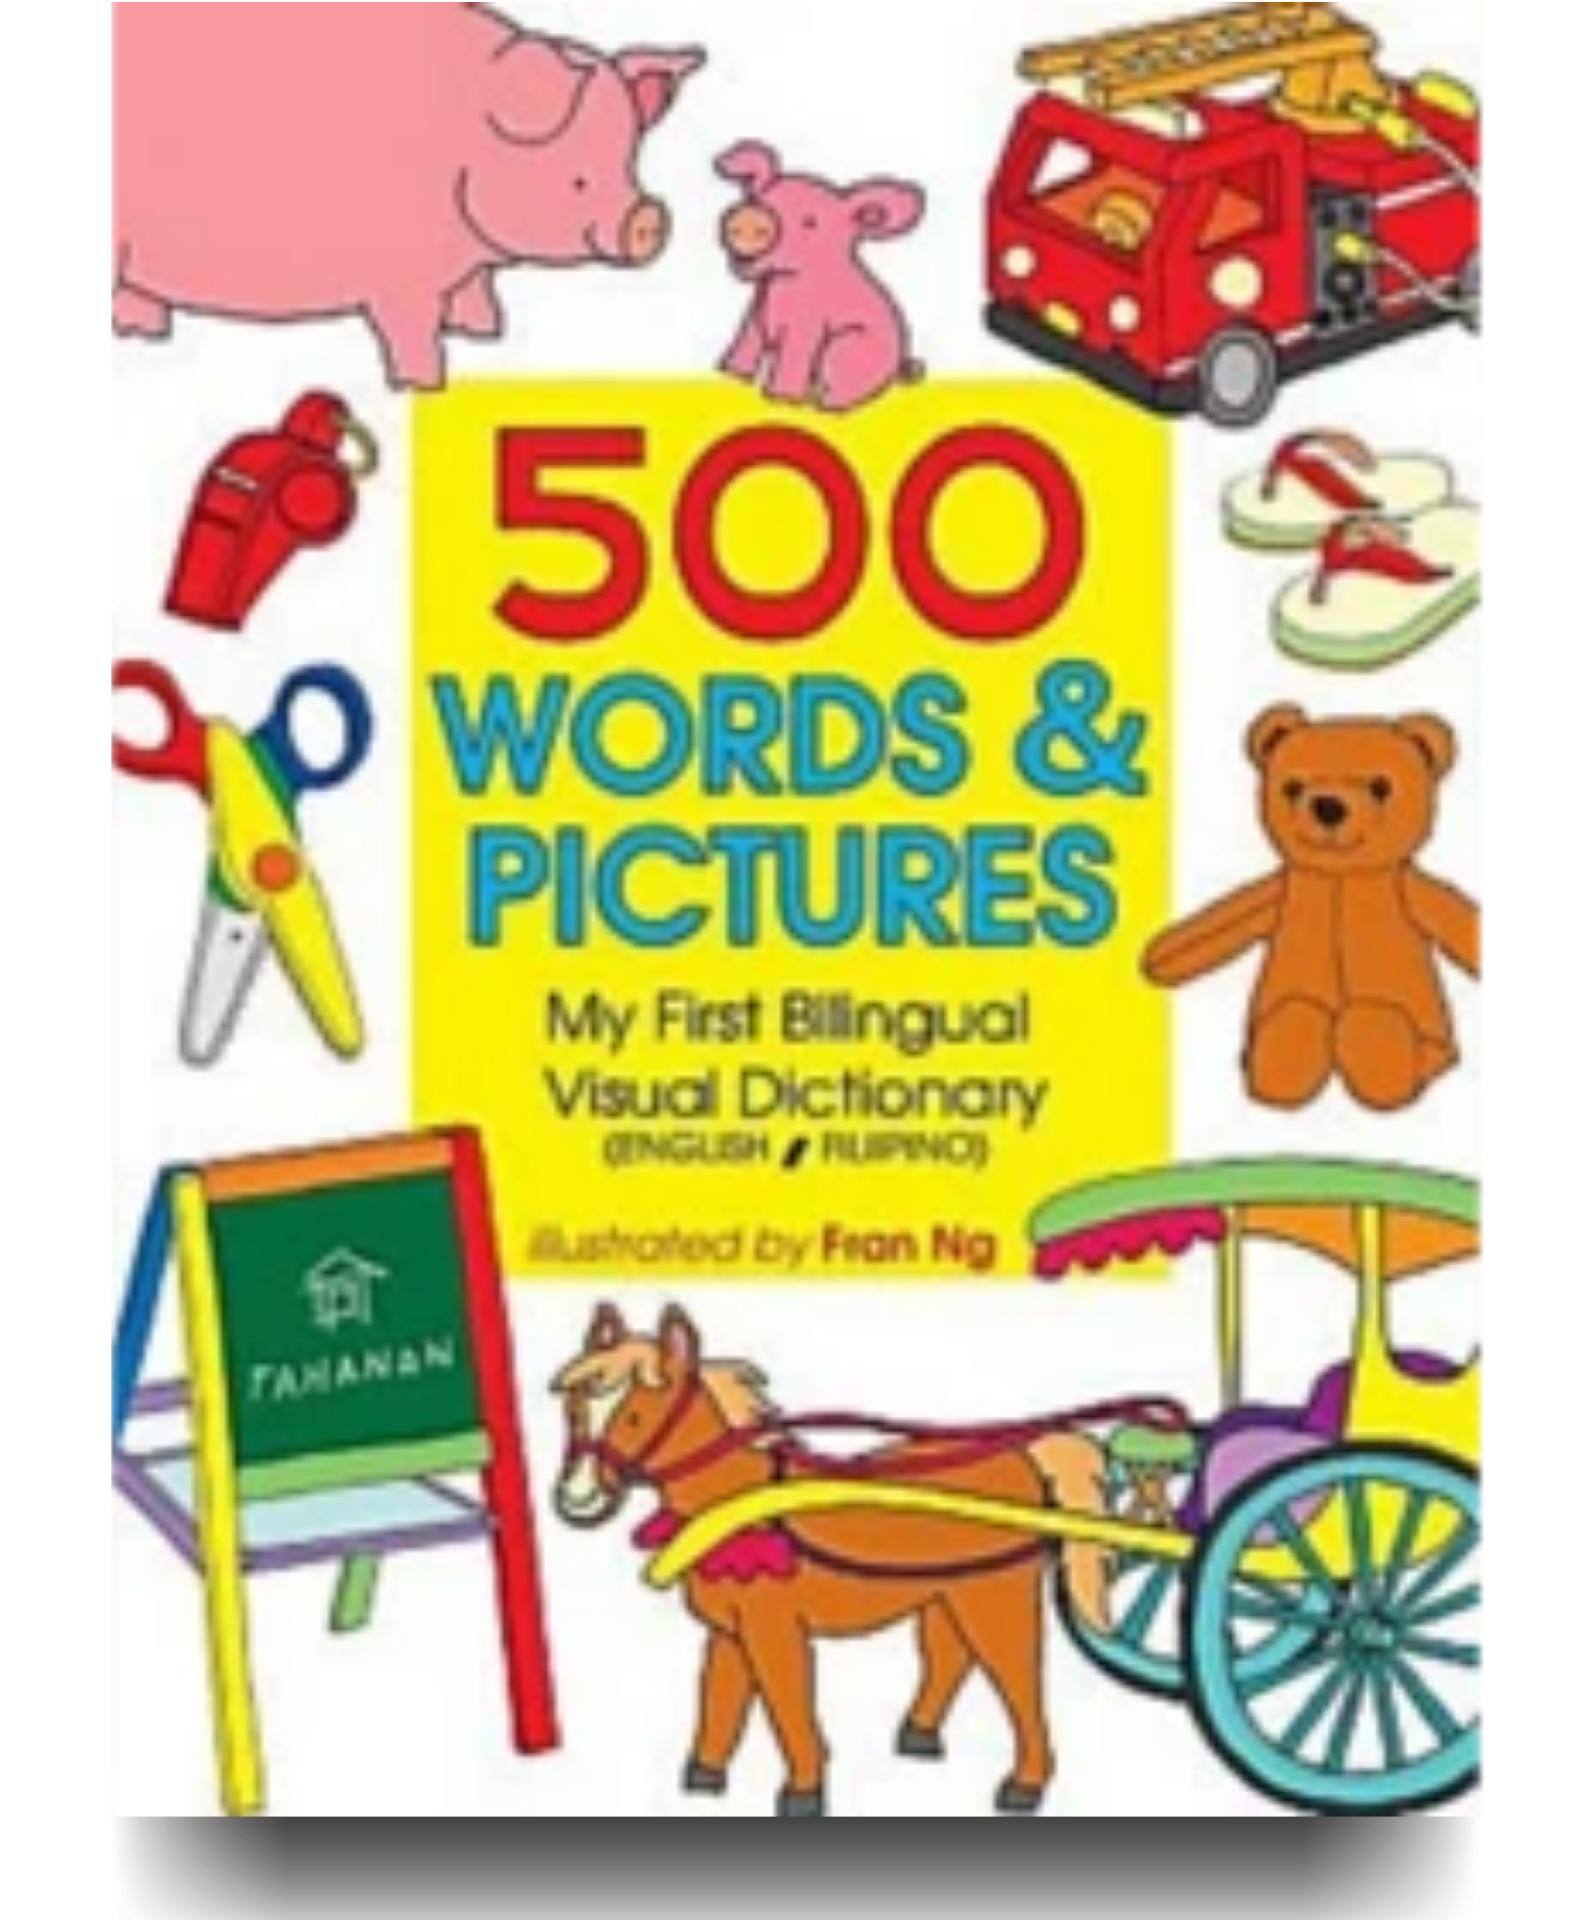 500 Words & Pictures: My First Bilingual Visual Dictionary - Philippine Expressions Bookshop